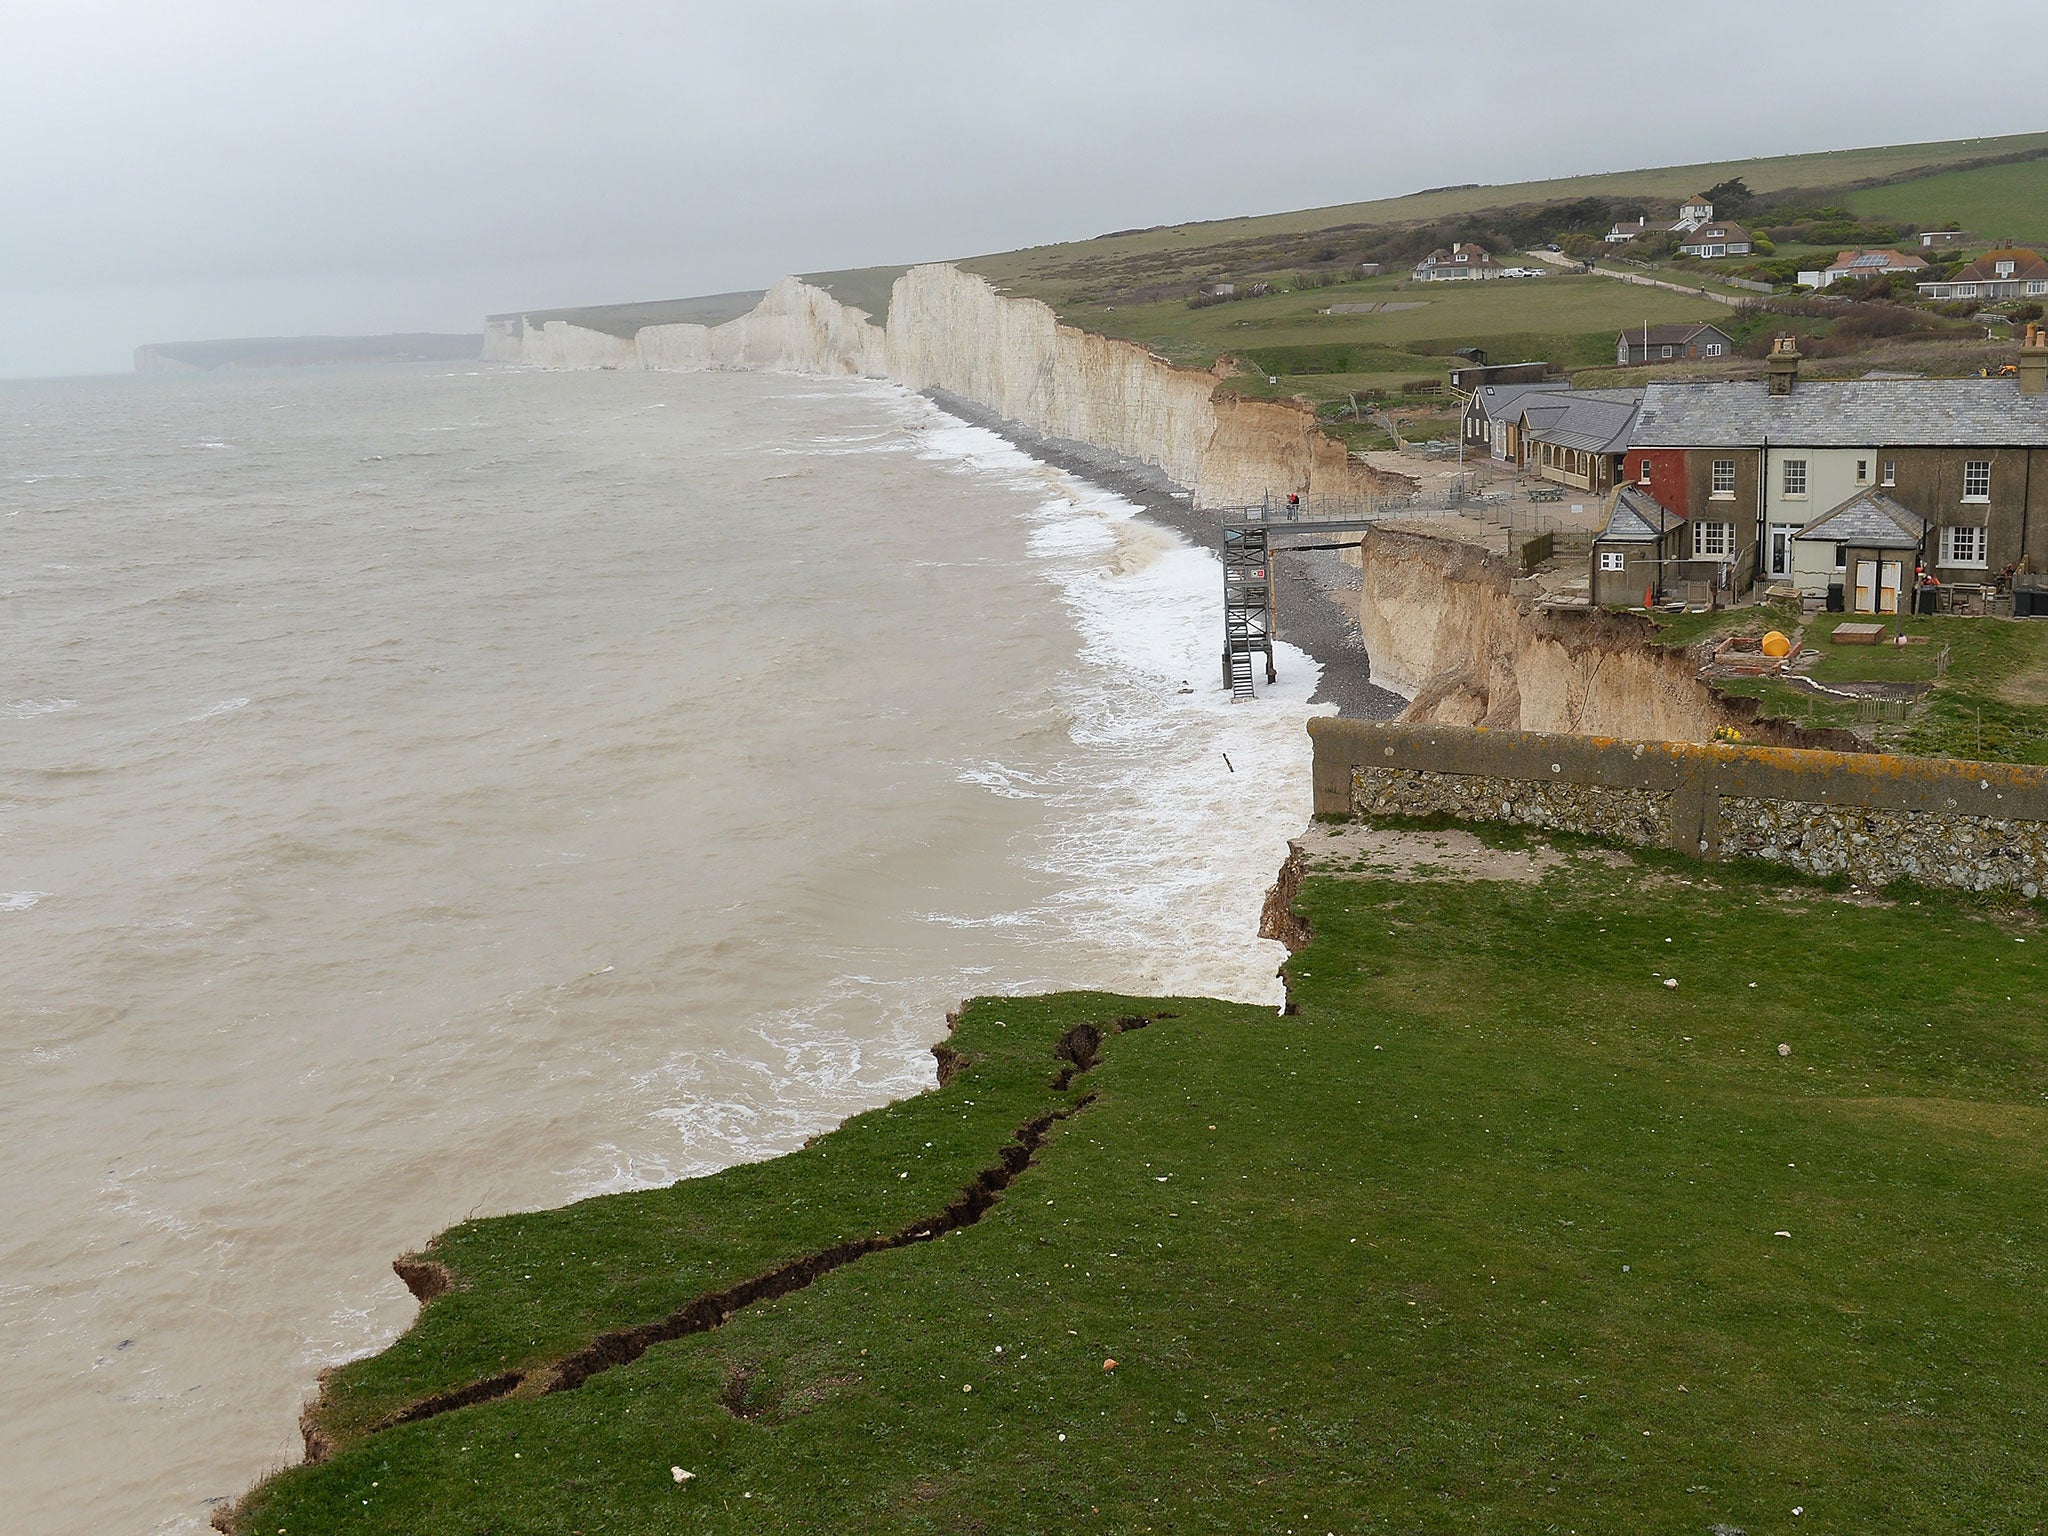 The woman's husband and two young boys were found dead at Birling Gap near Eastbourne